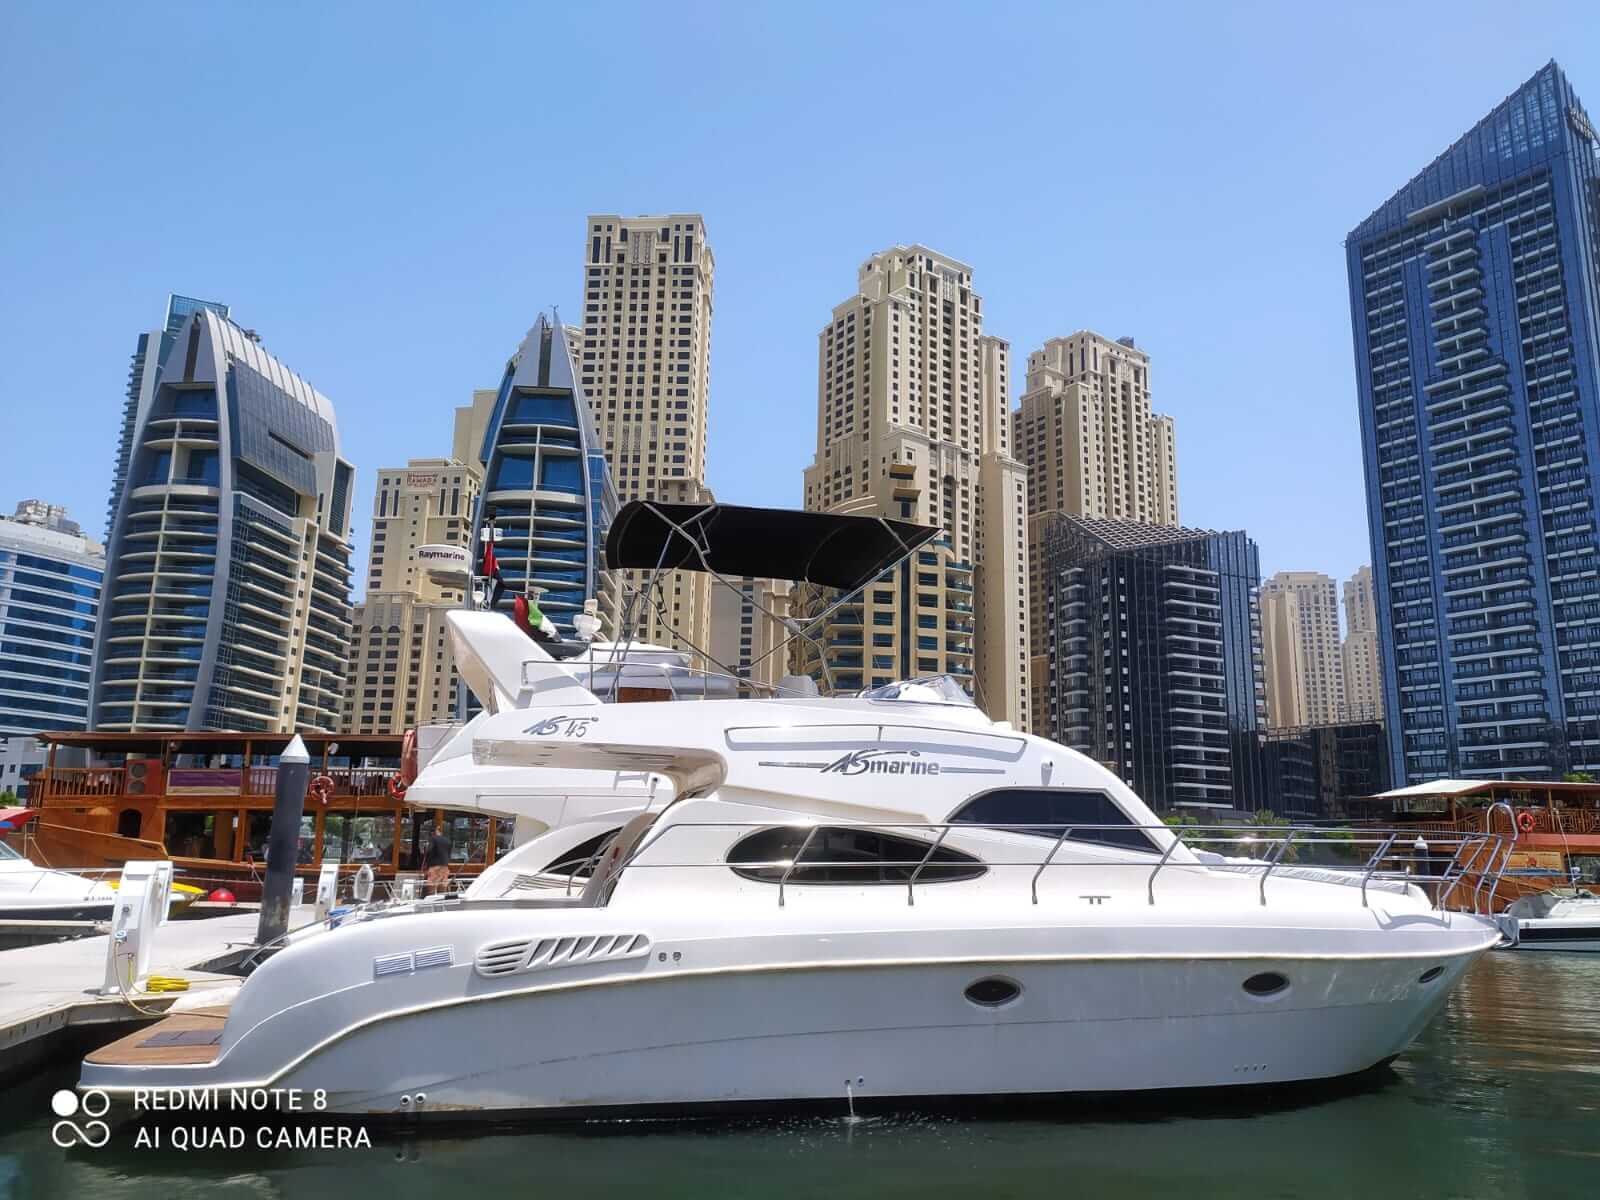 45FT (6-Hour cruise 27,000AED)